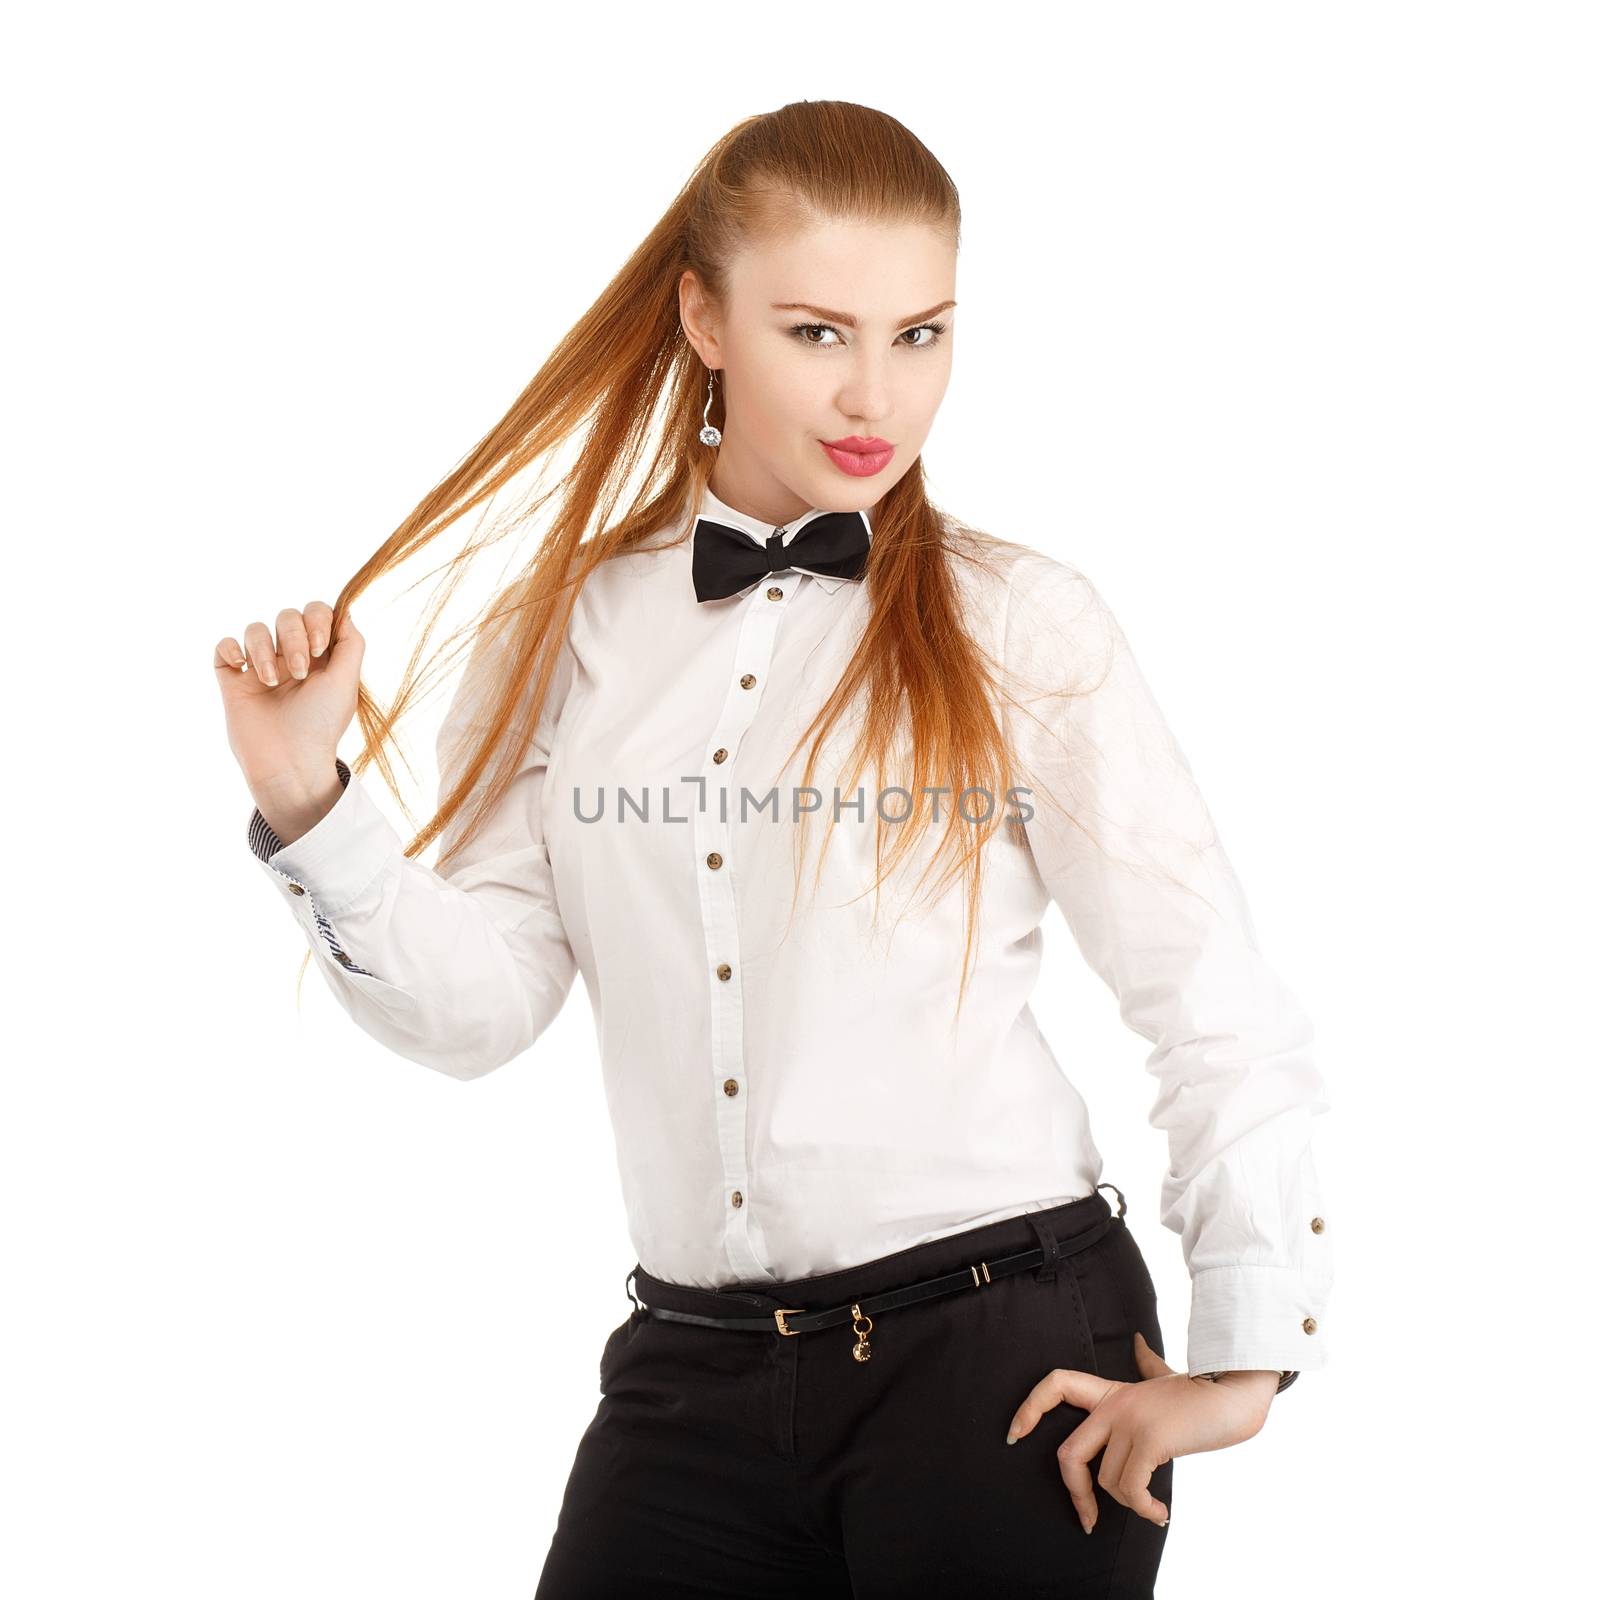 Portrait of beautiful young woman in strict clothing with bow ti by natazhekova